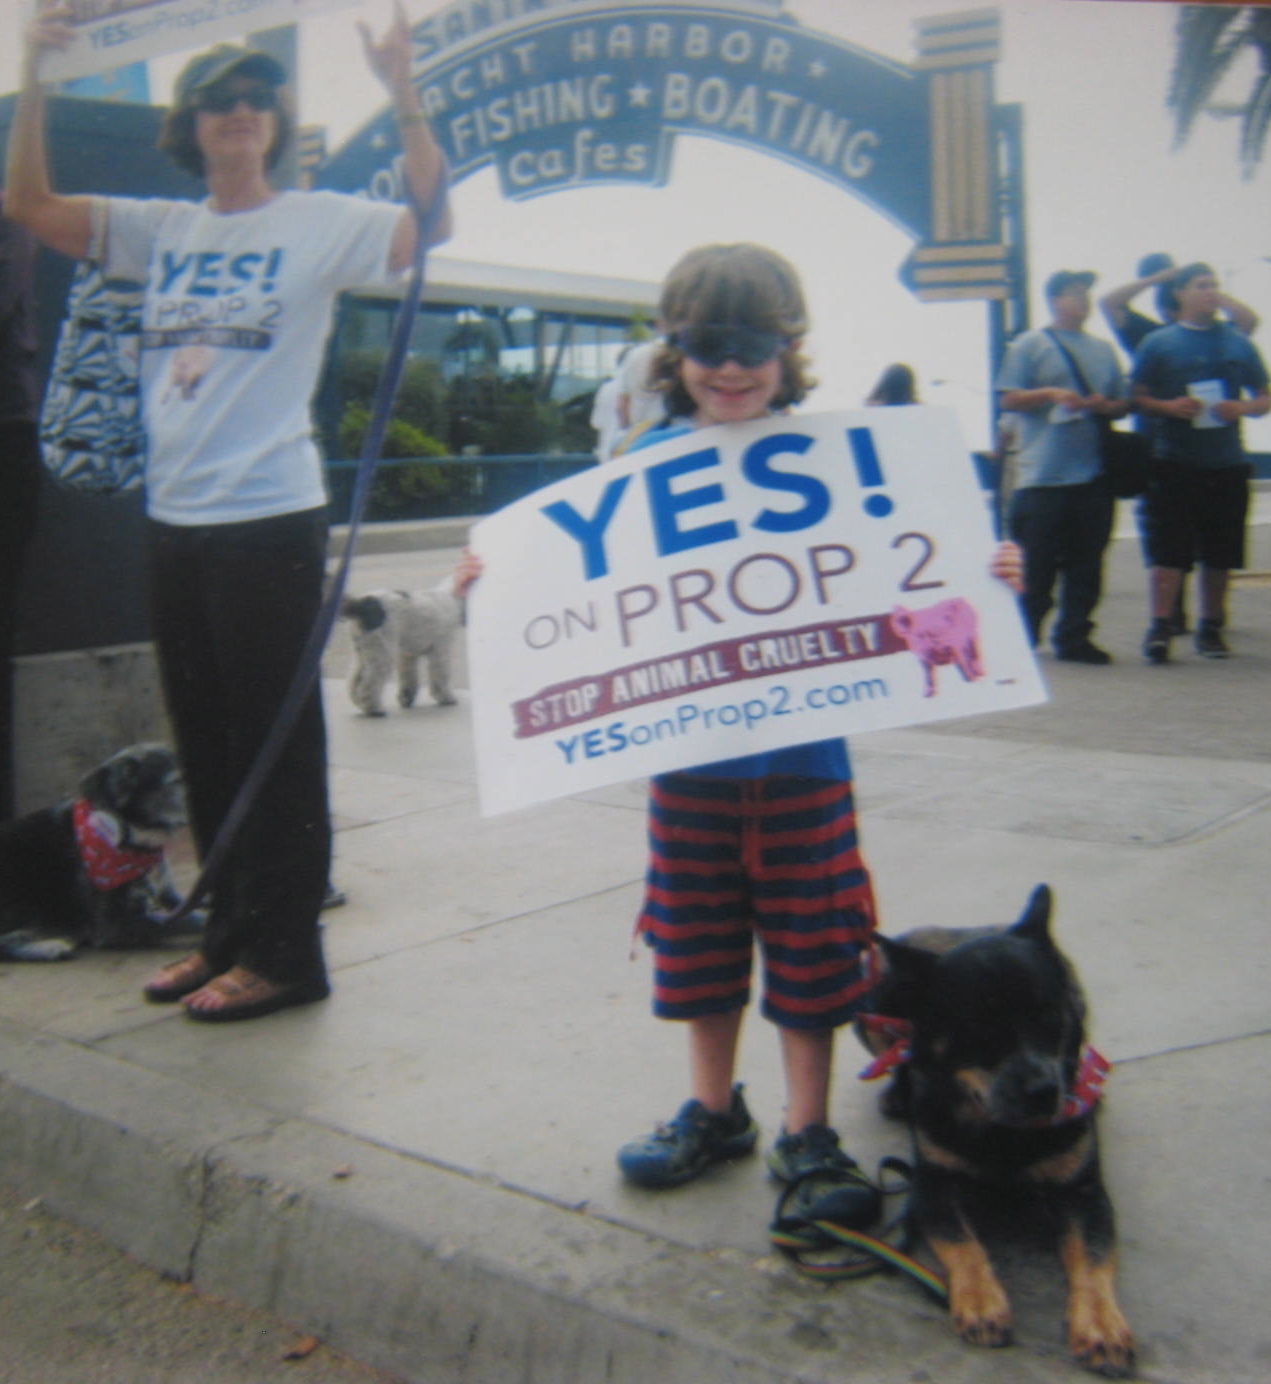 A very young activist.